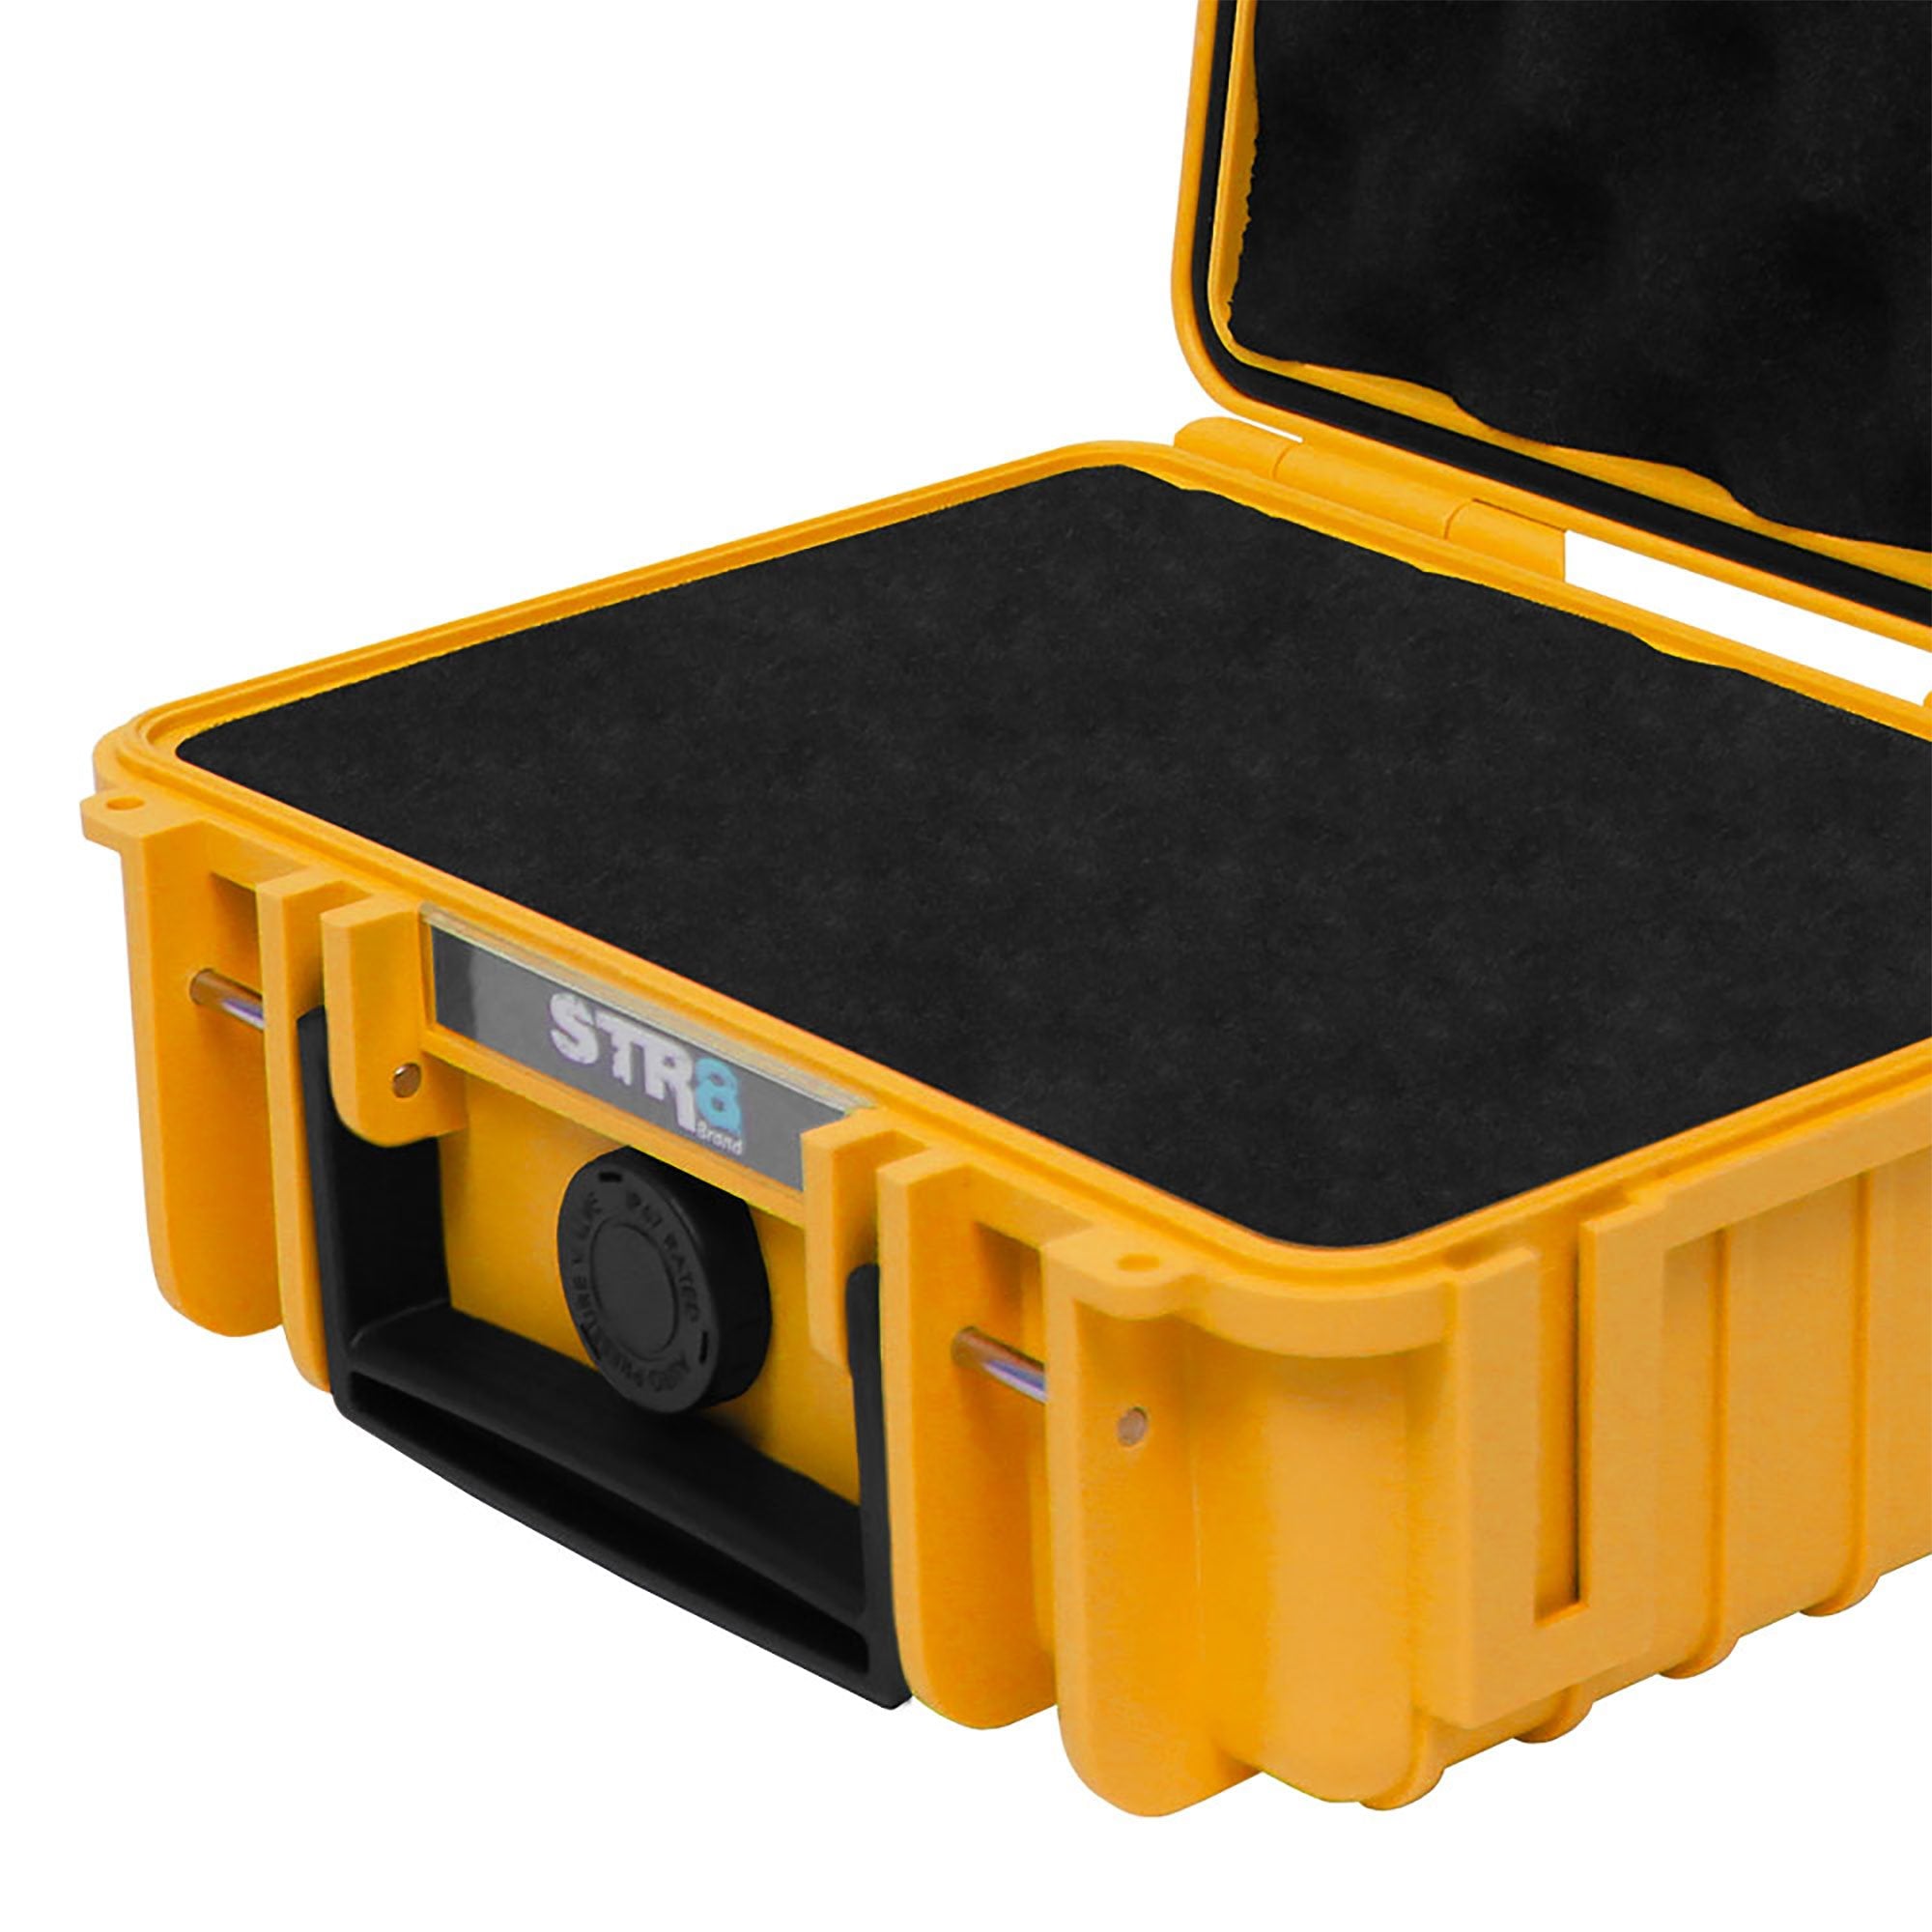 8" 2 Layer Canary Yellow STR8 Case - 4